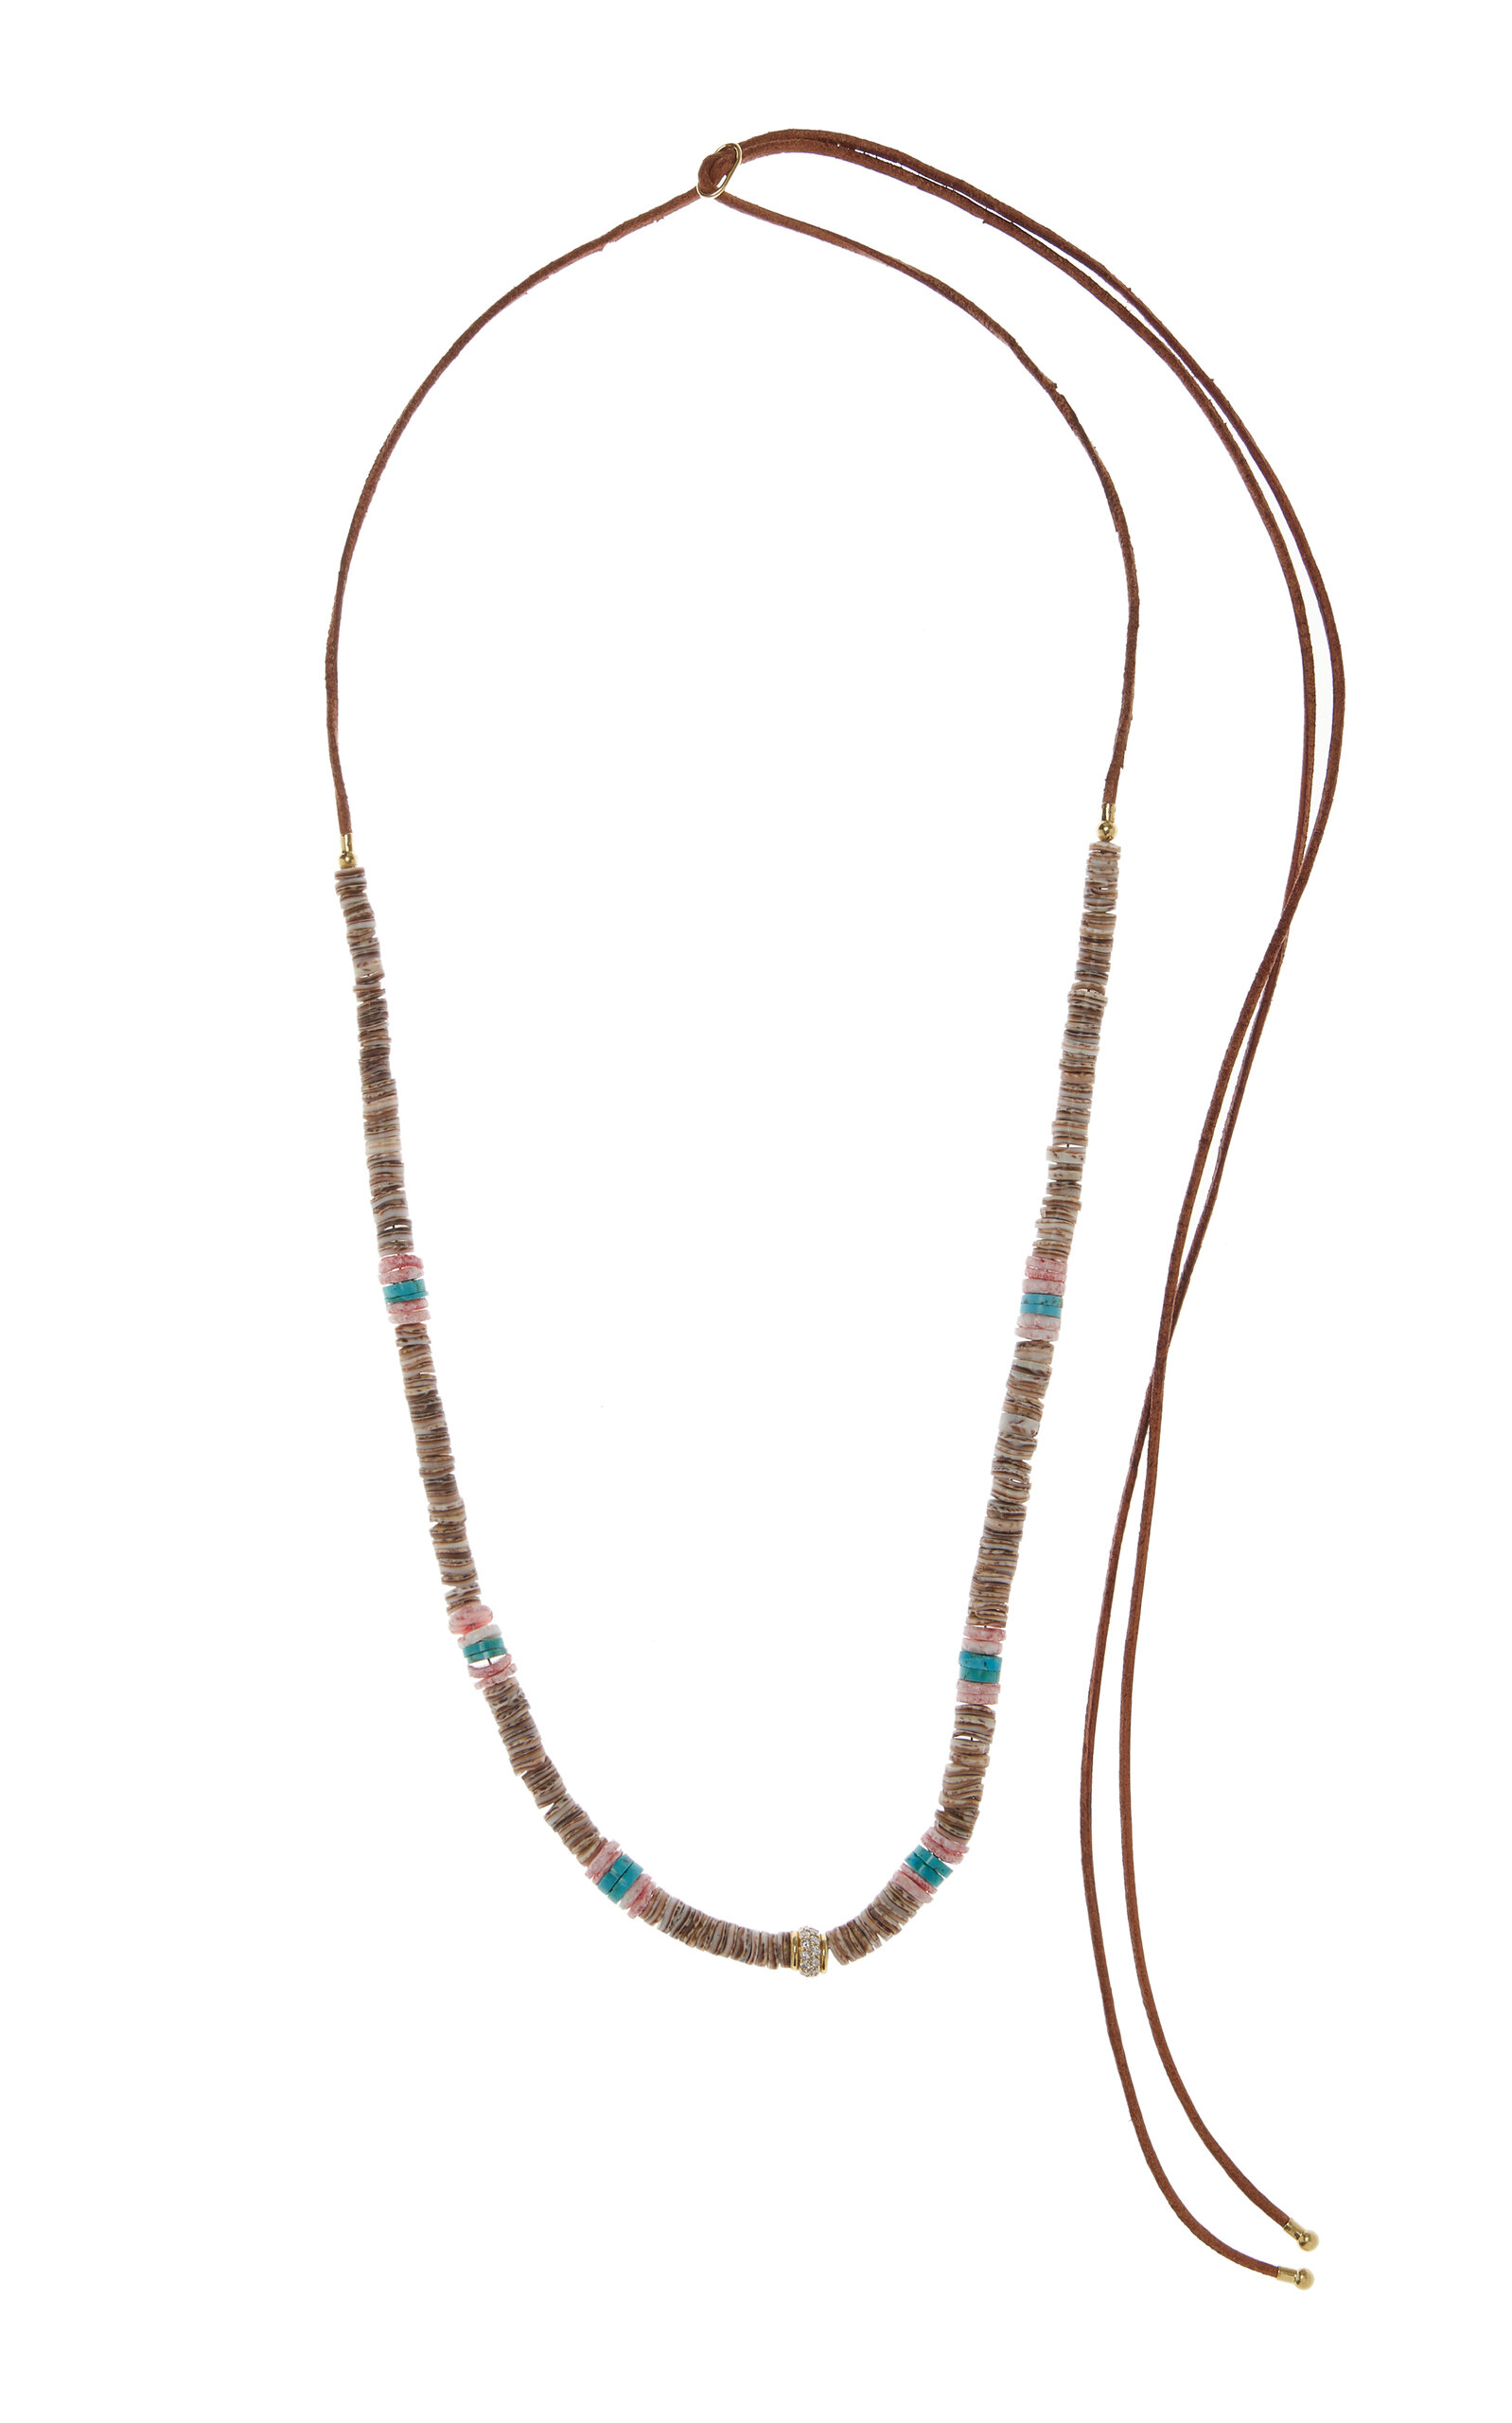 Jenna Blake Beaded Leather Necklace In Tan